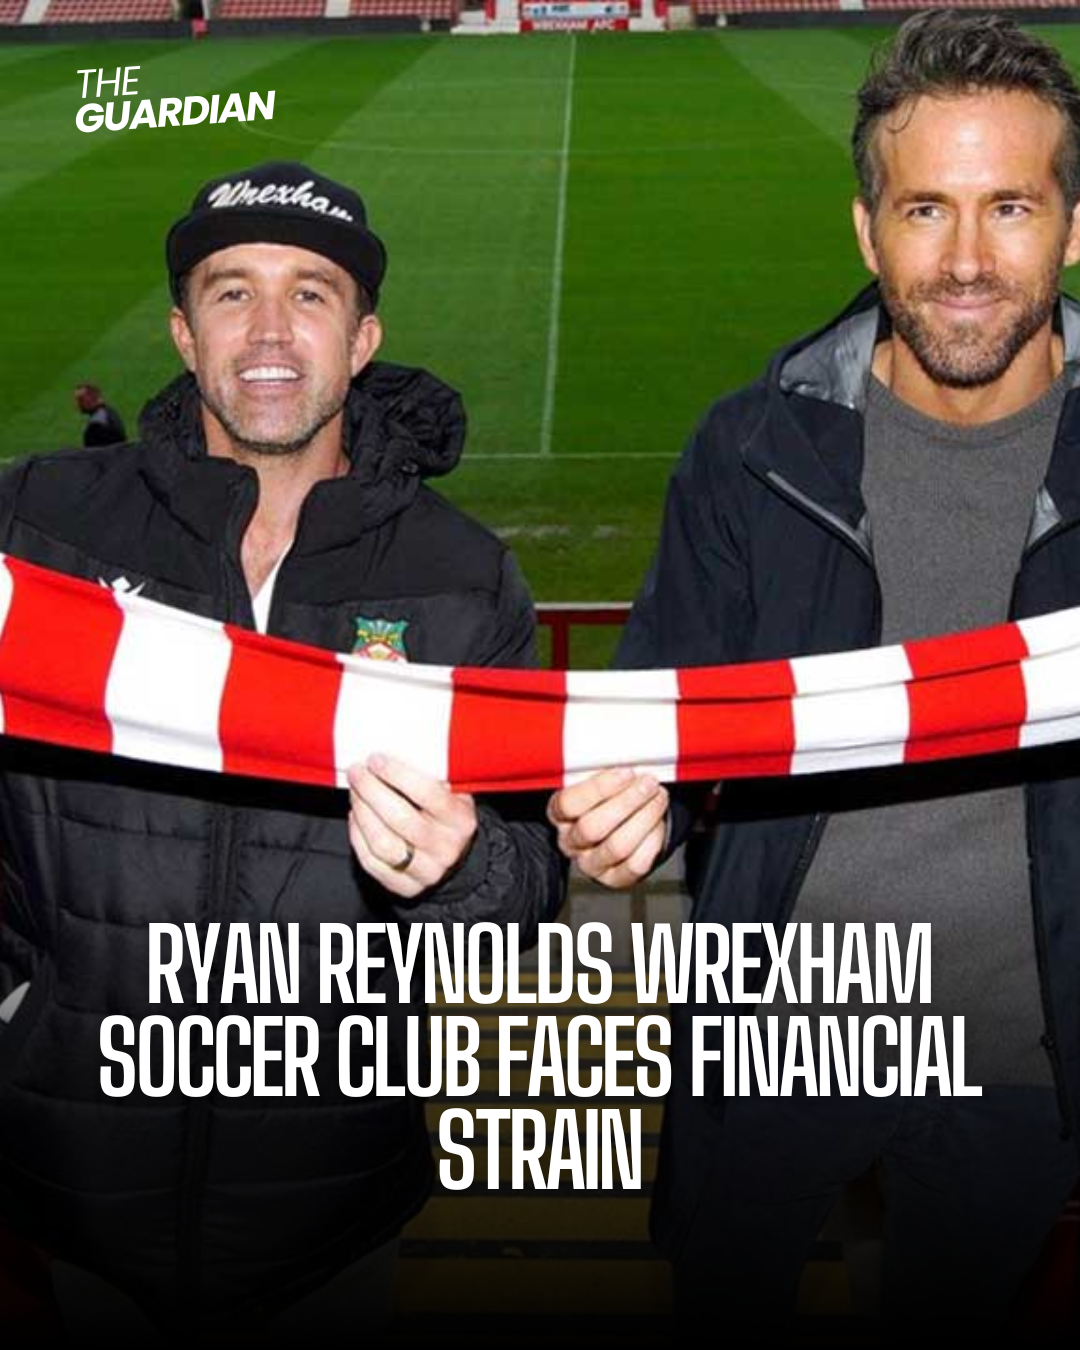 Owning a football club is hurting Ryan Reynolds' chequebook, as Wrexham revealed nearly 9 million pounds ($11.4 million) due.